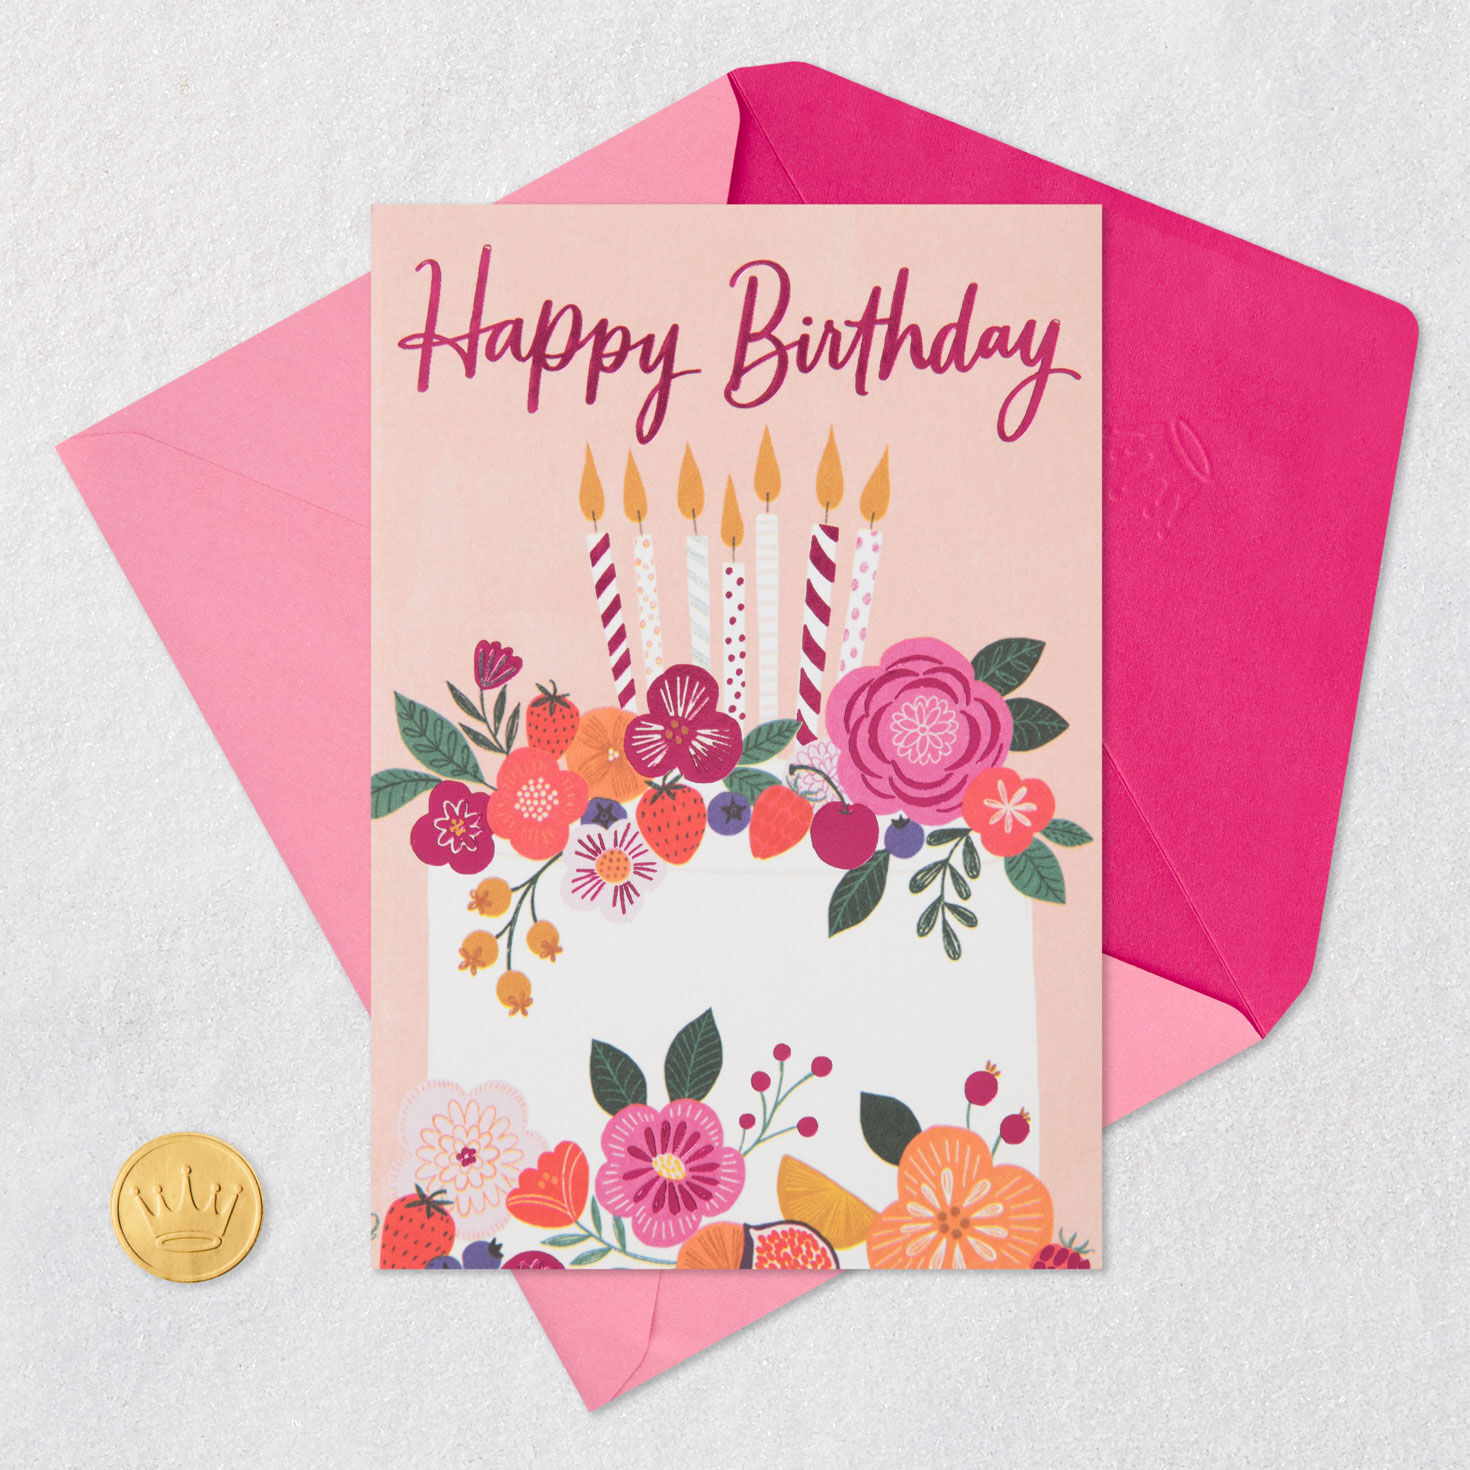 Another Wish Come True Birthday Card - Greeting Cards | Hallmark